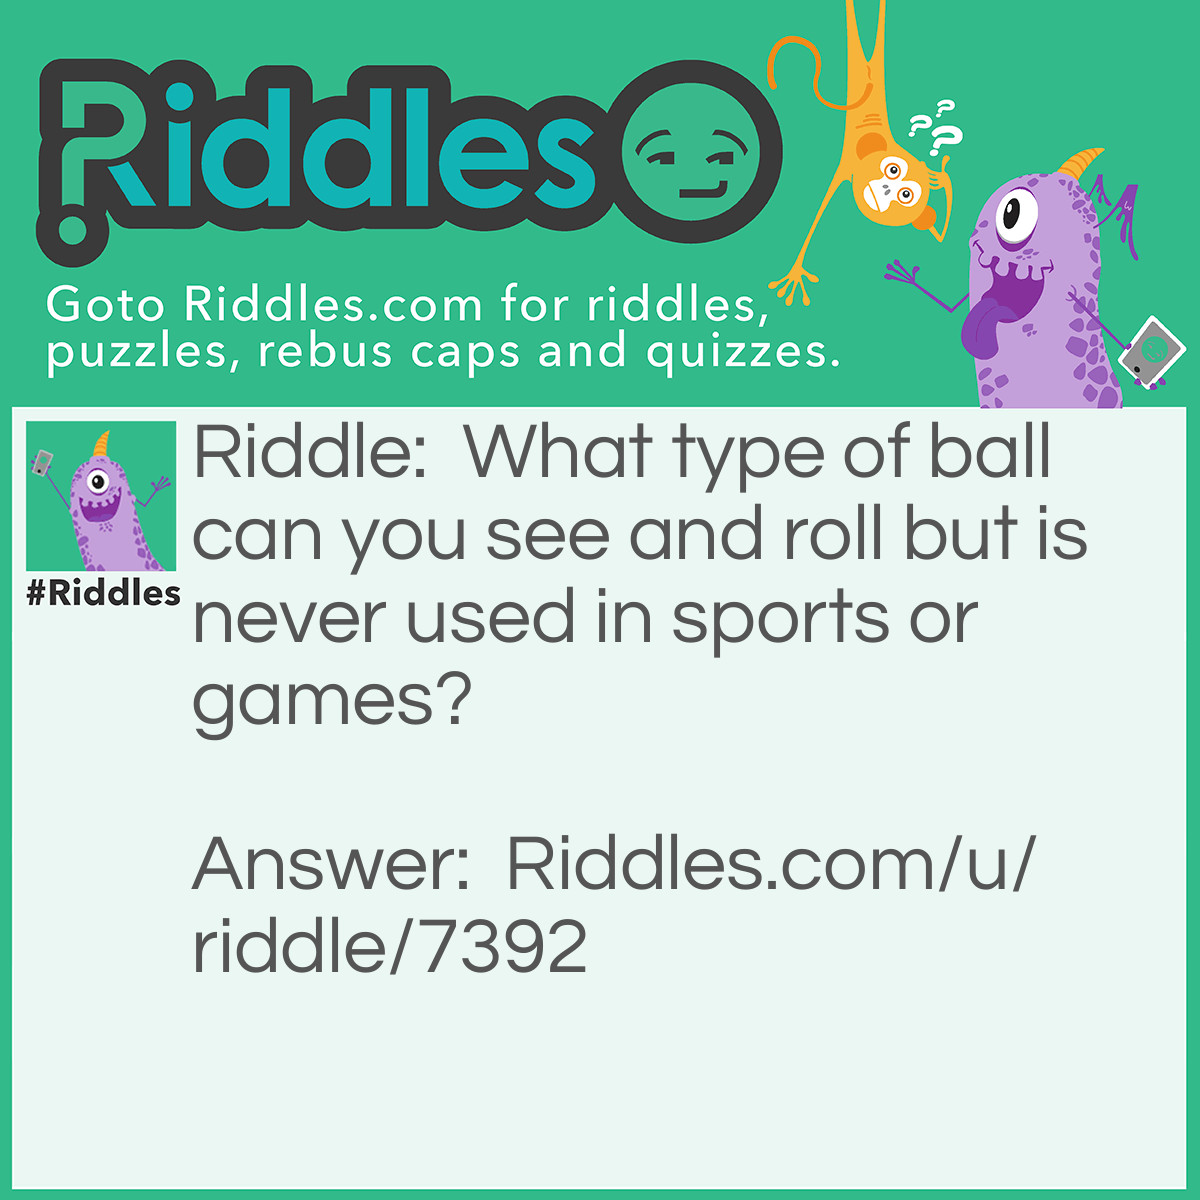 Riddle: What type of ball can you see and roll but is never used in sports or games? Answer: An eyeball.